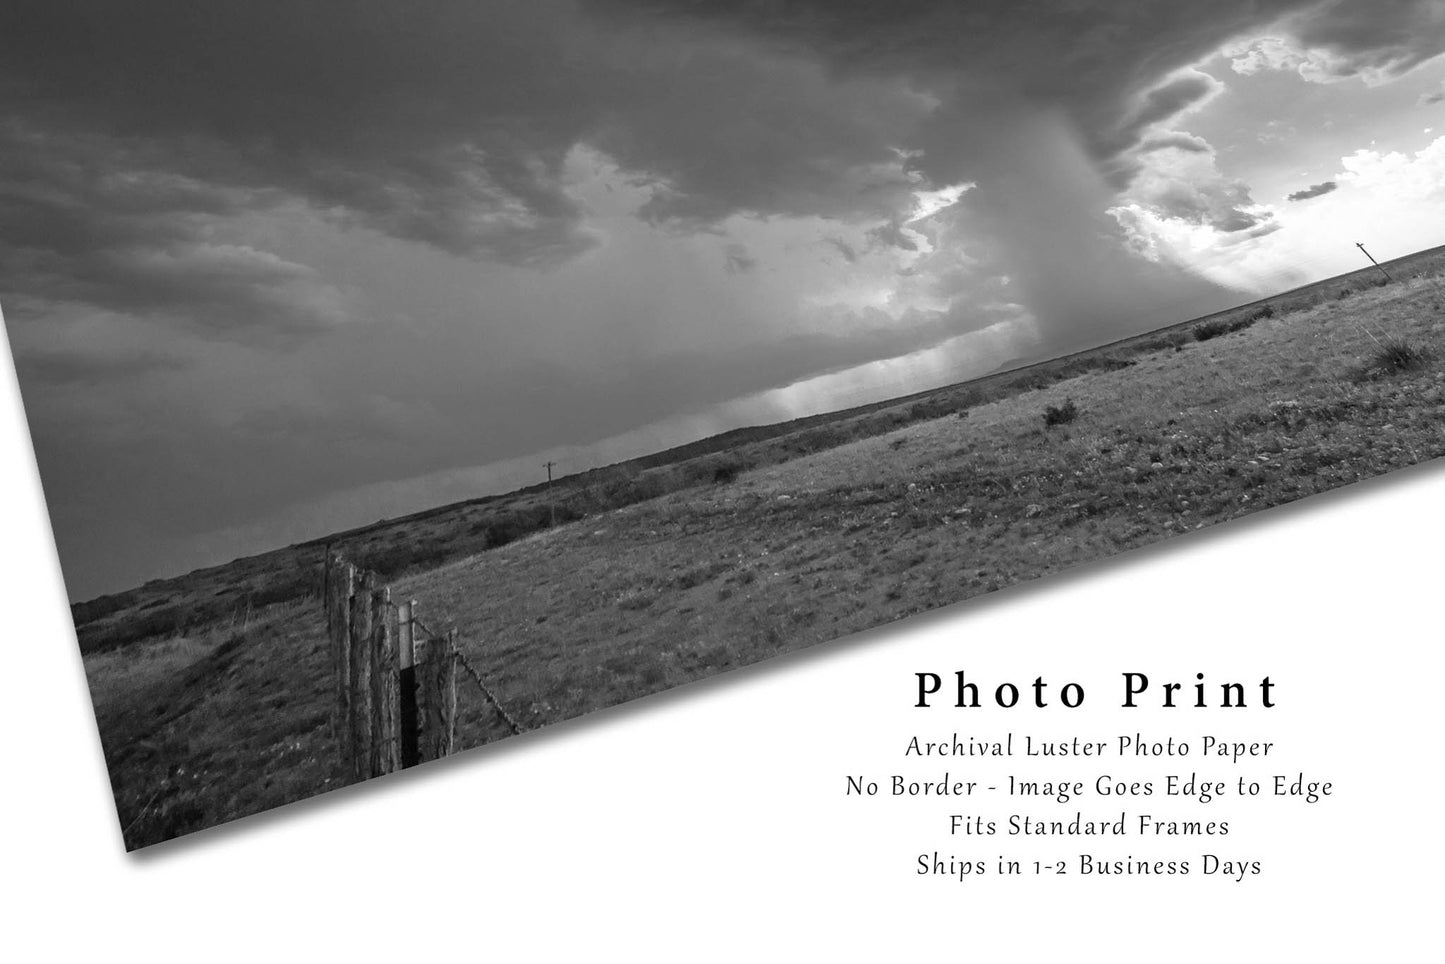 West Texas Photography Print - Black and White Picture of Rain Shaft in Storm Over Desert Plains Weather Thunderstorm Wall Art Photo Decor